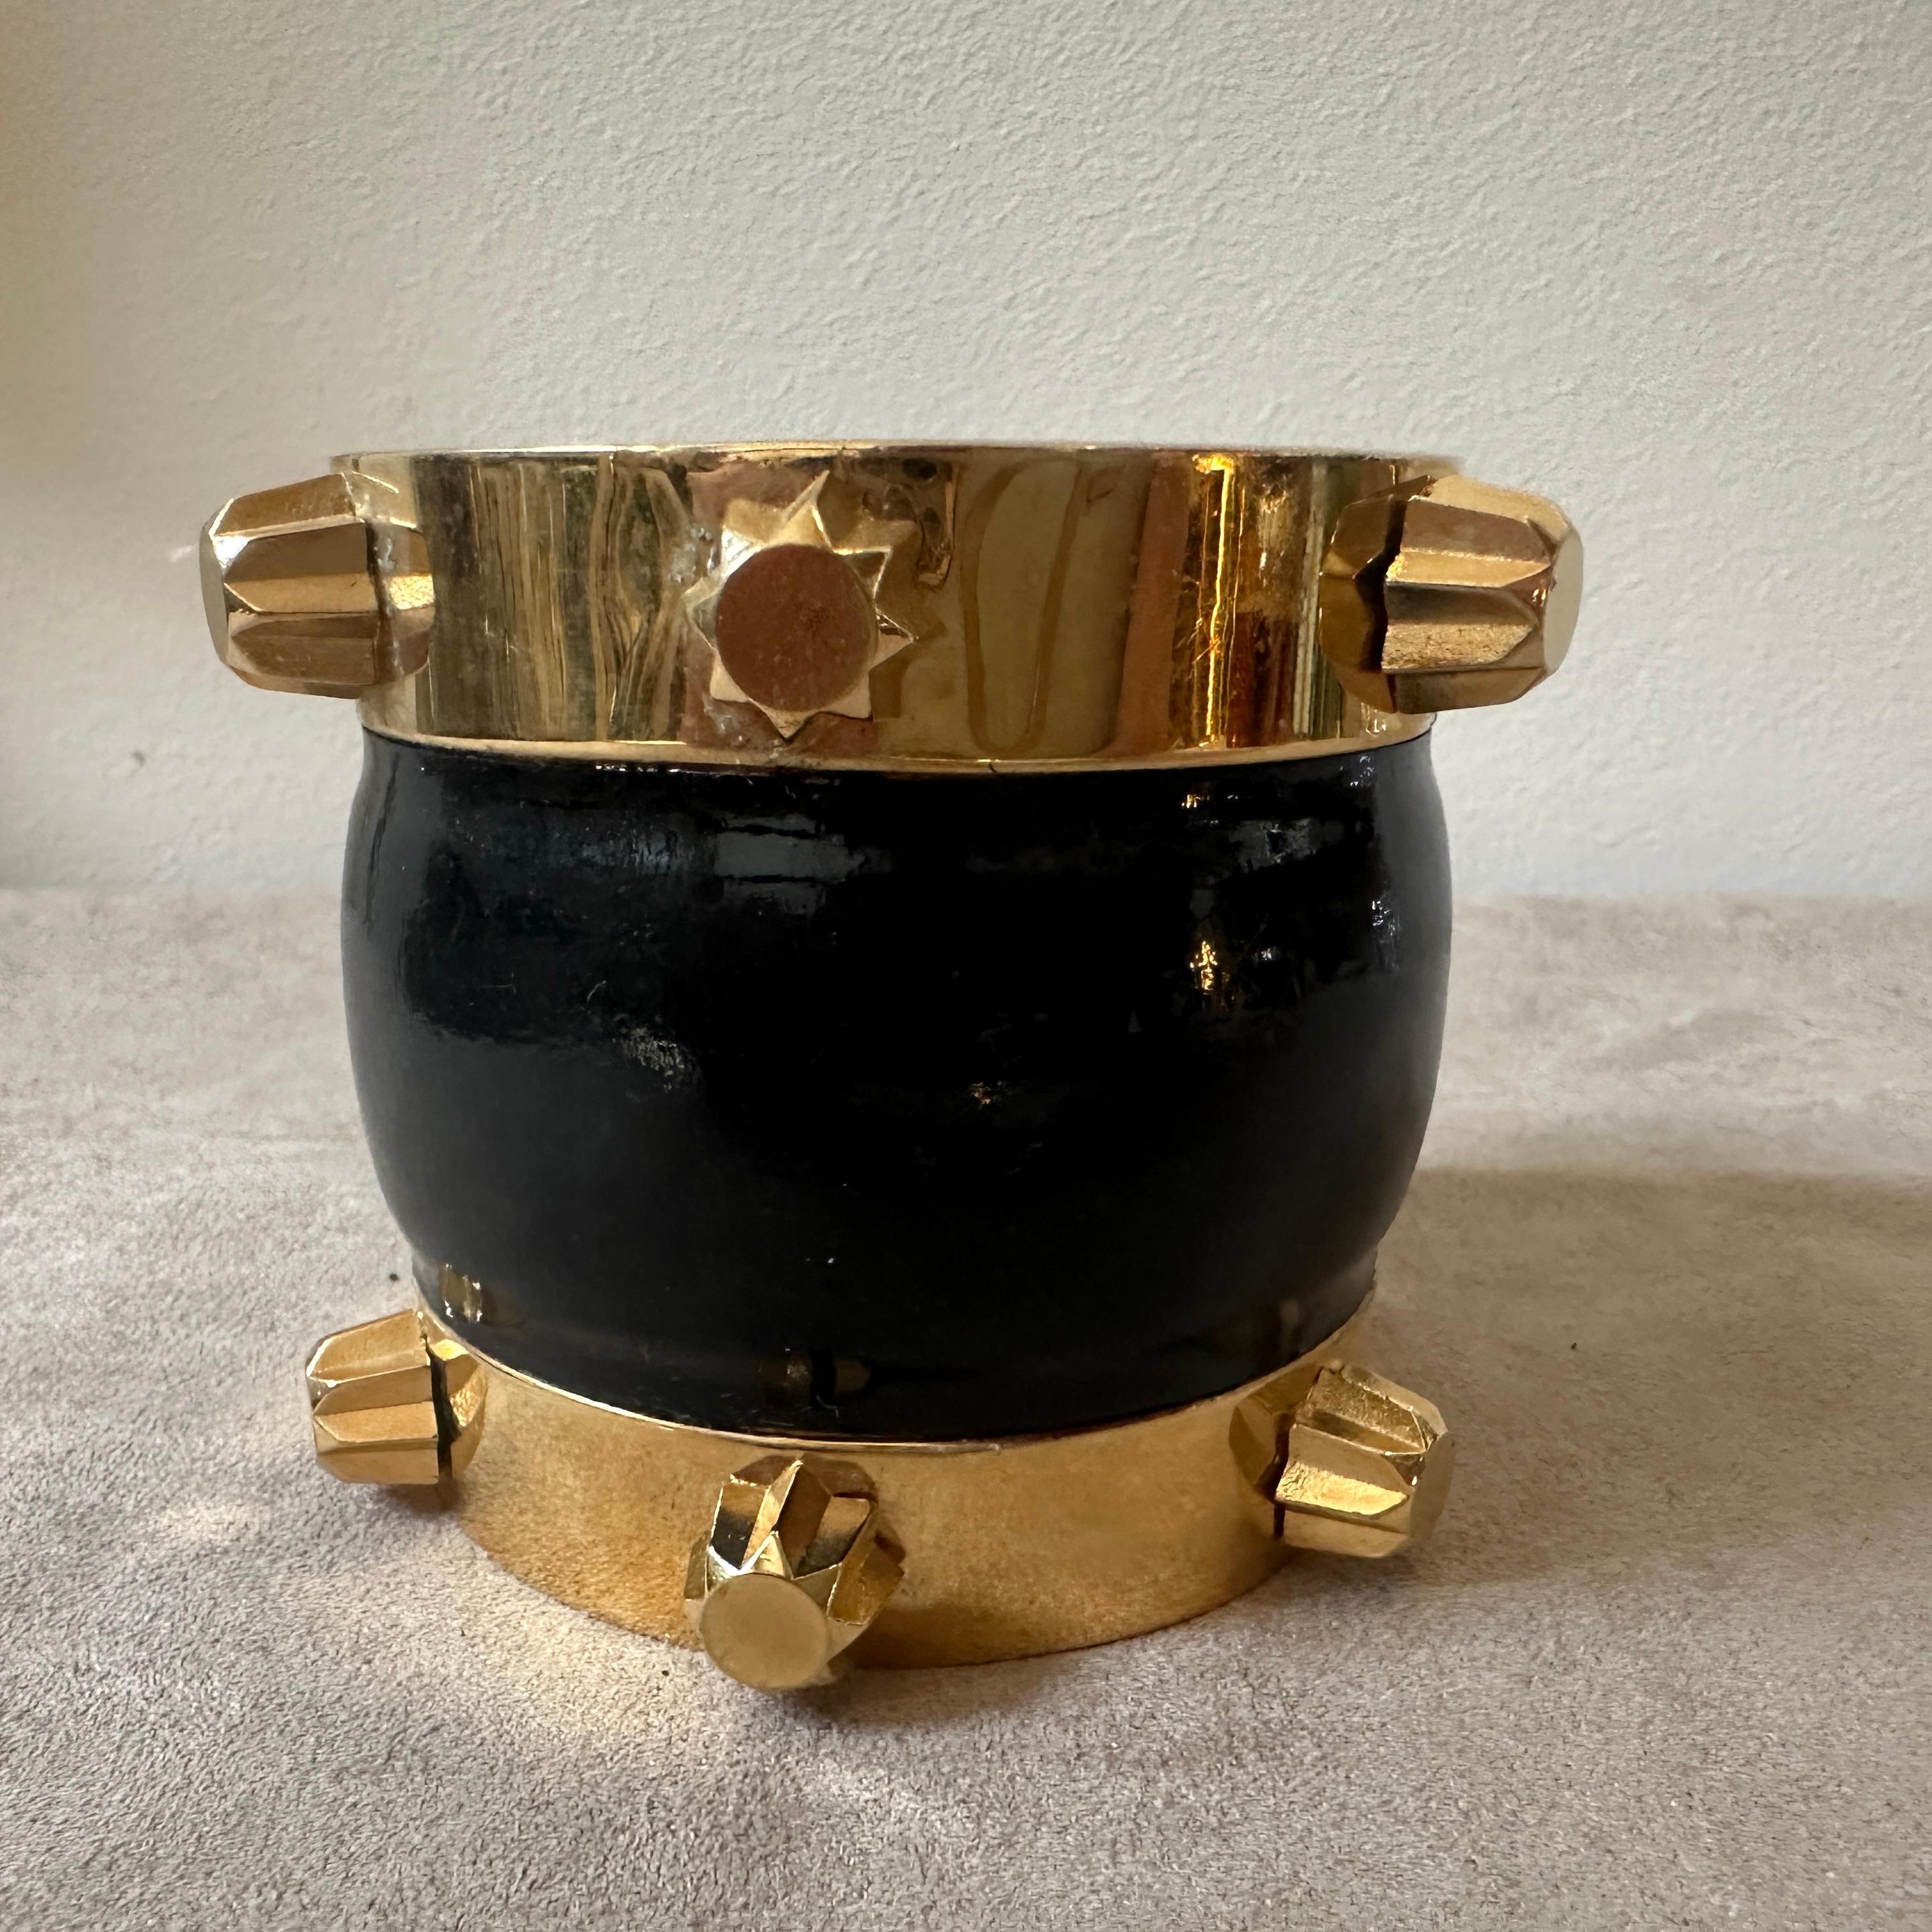 An amazing bangle bracelet designed by Dsquared2 and manufactured in Italy in the Early 21st century, it's in perfect condition probably never worn. It's all marked inside